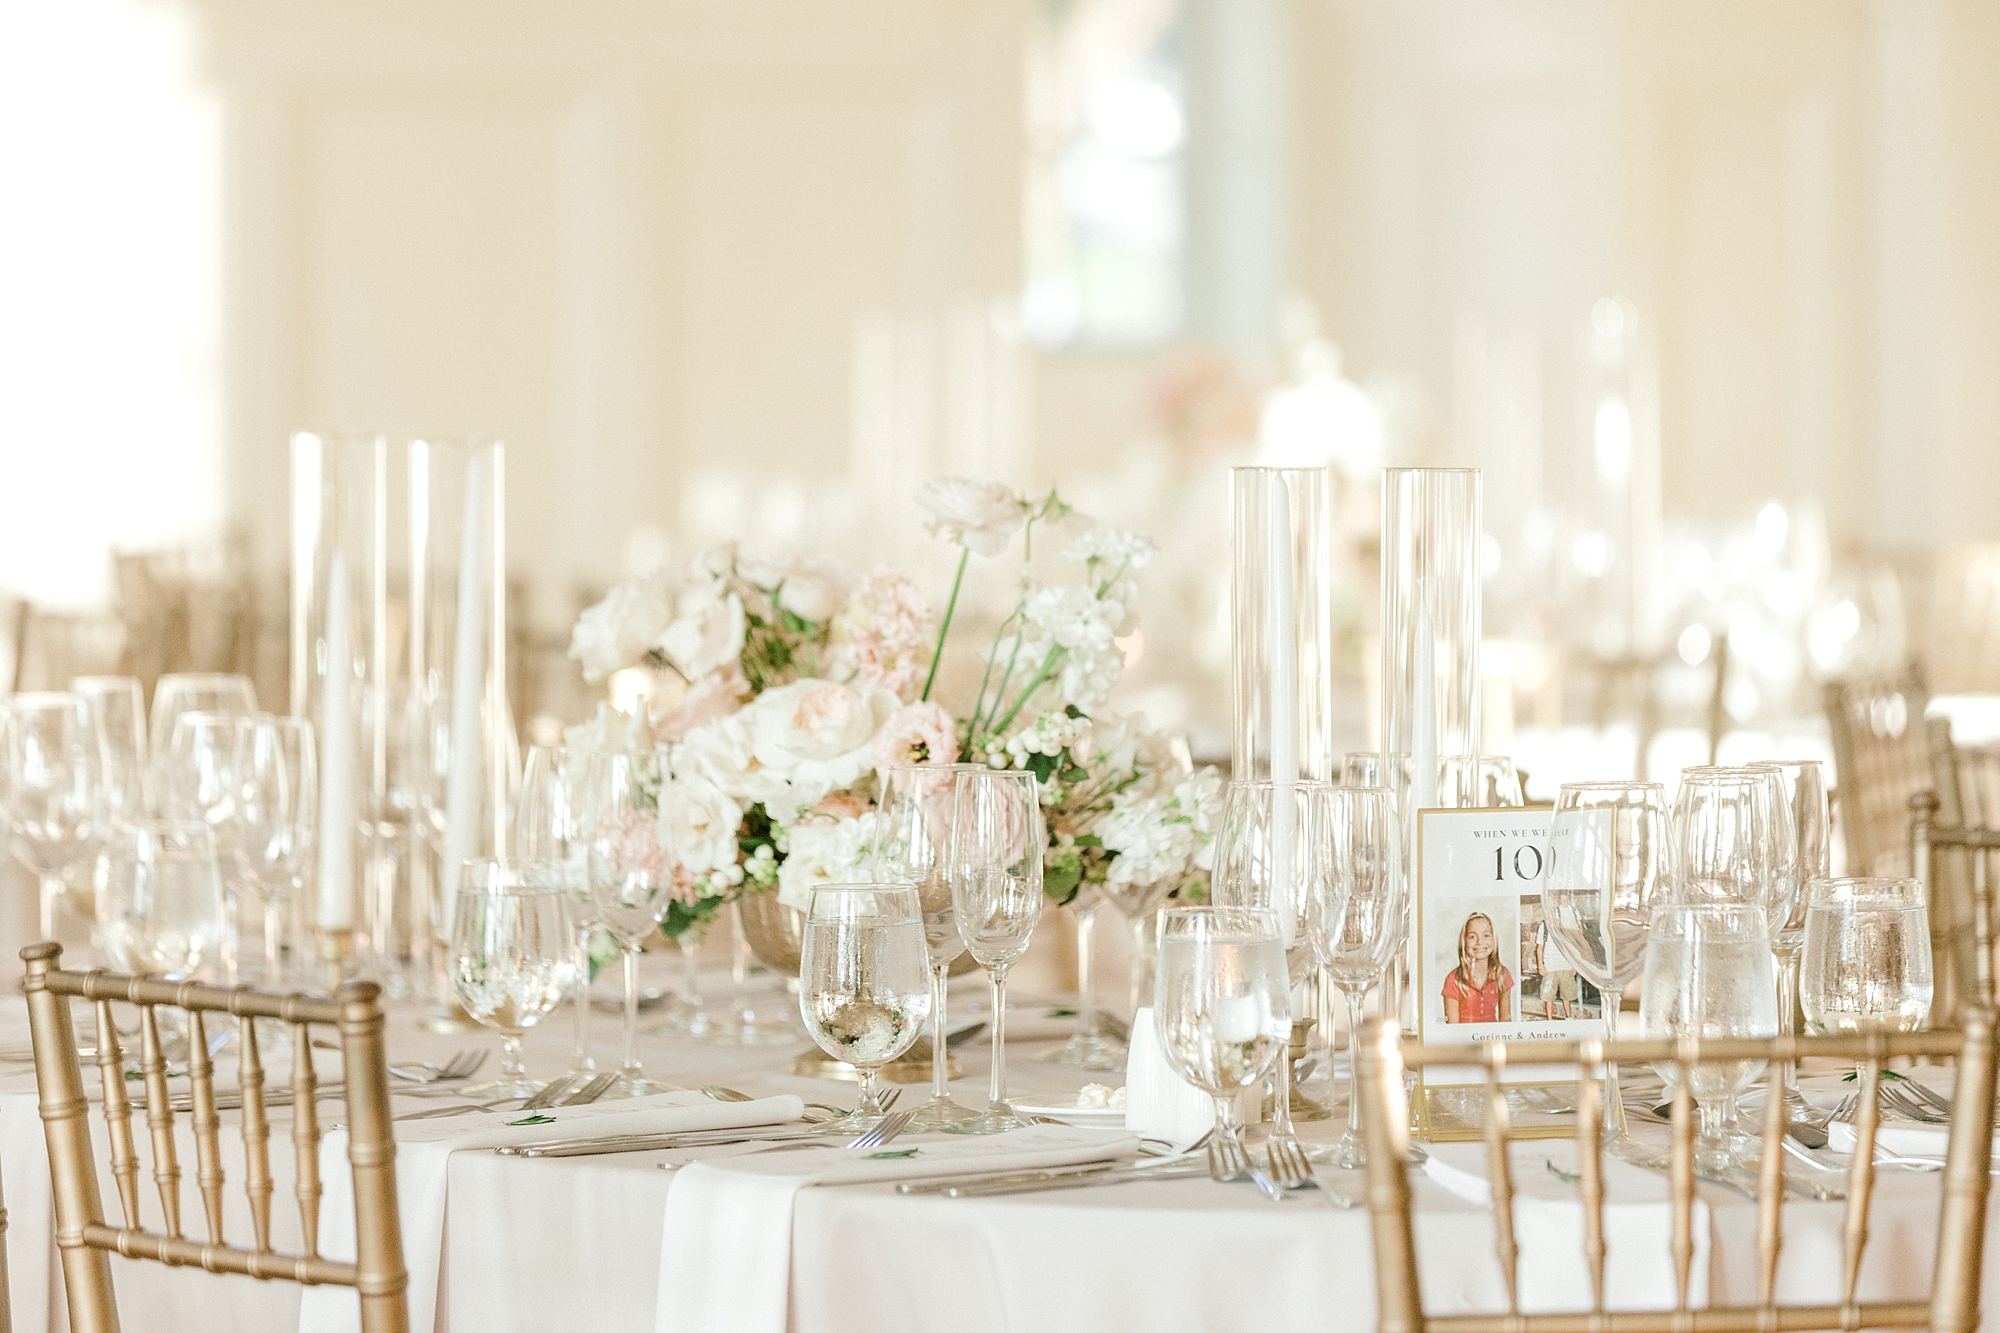 luxurious summer wedding reception tables capes with gold silverware and candles in tall glass vases